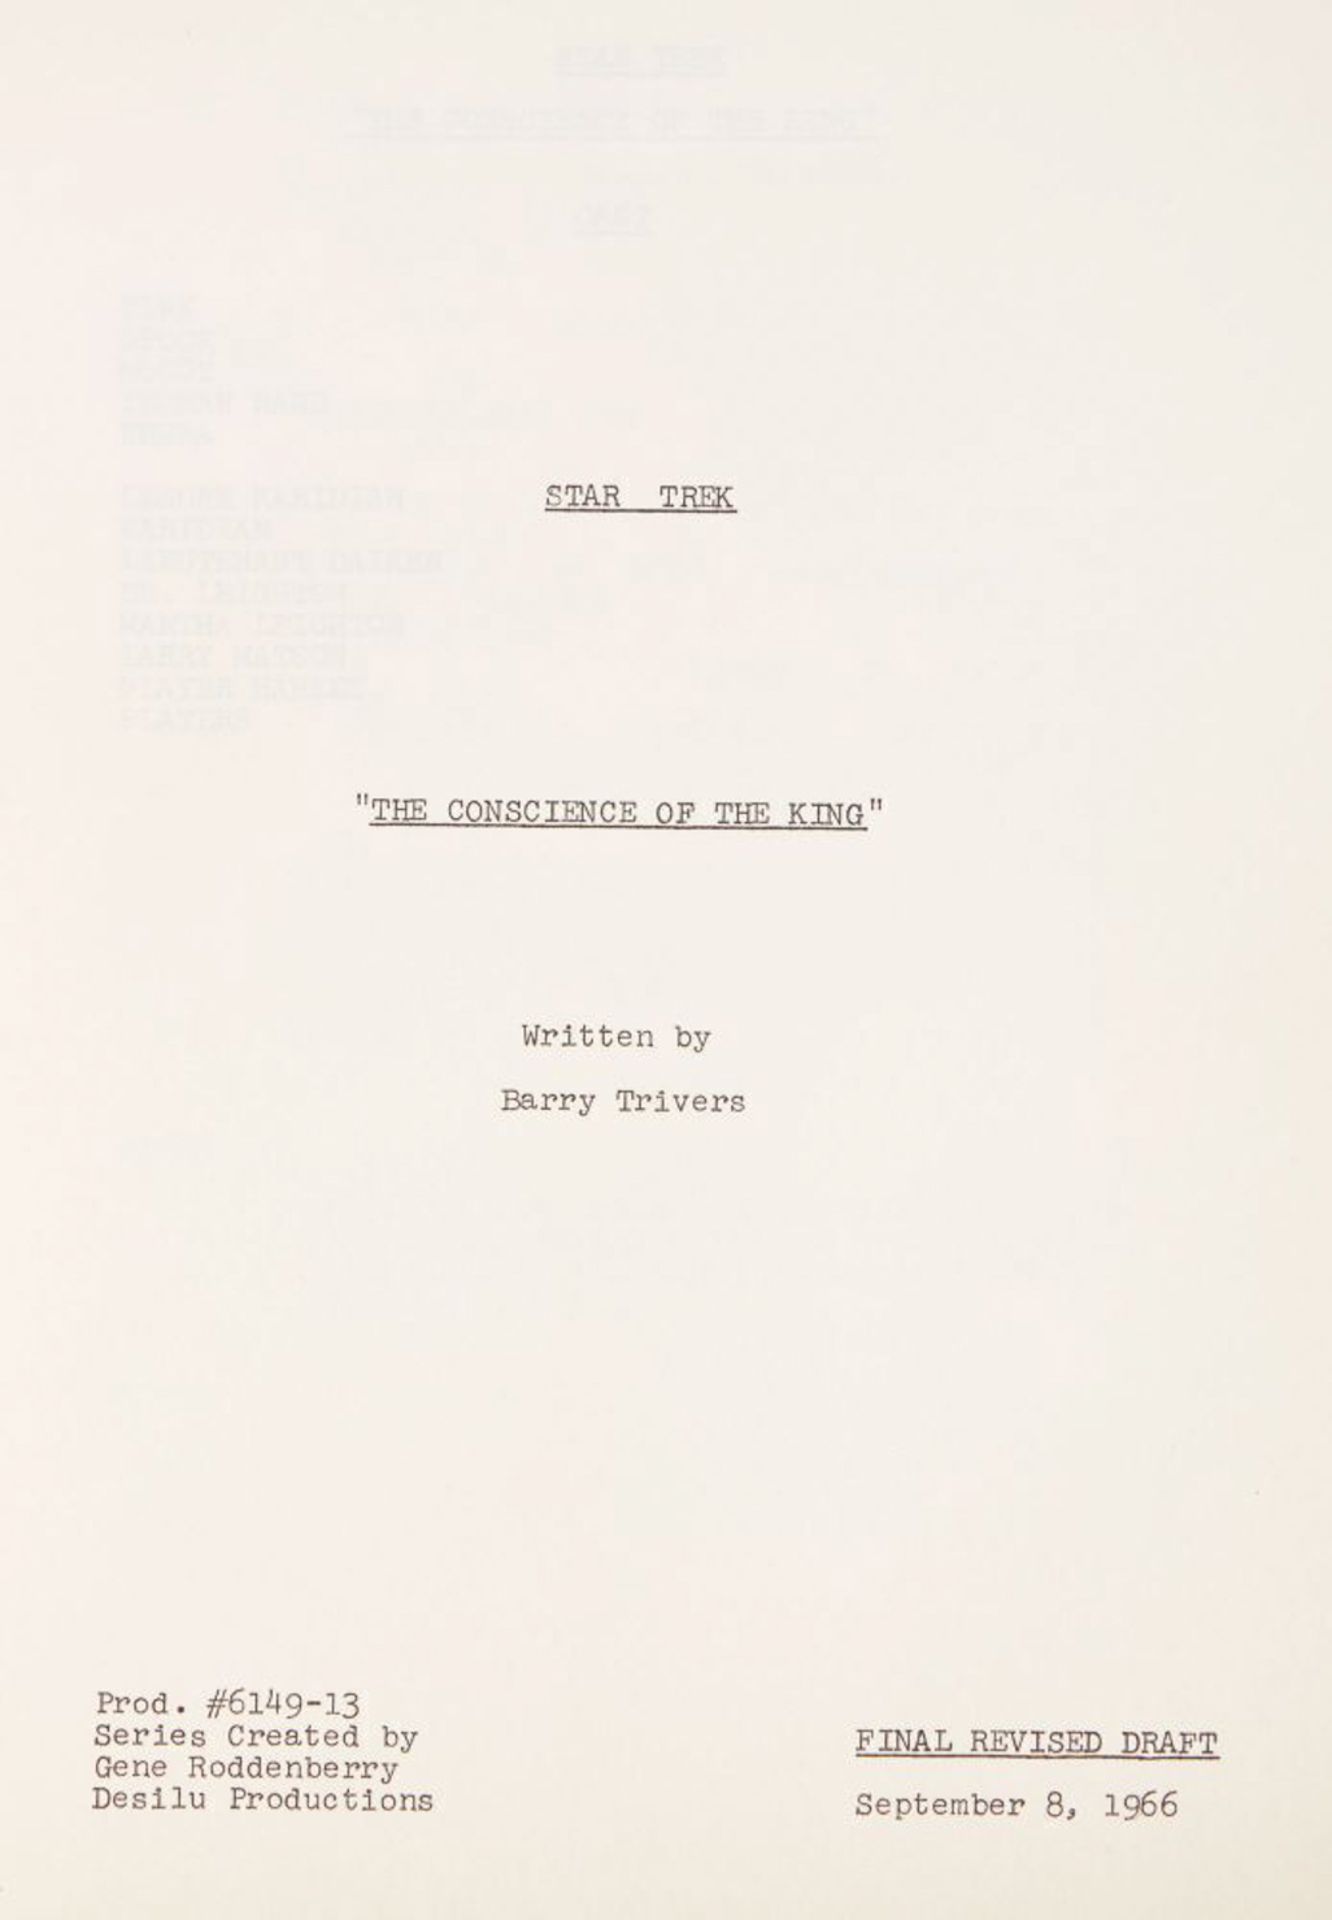 STAR TREK | "THE CONSCIENCE OF THE KING" SCRIPT - Image 2 of 5